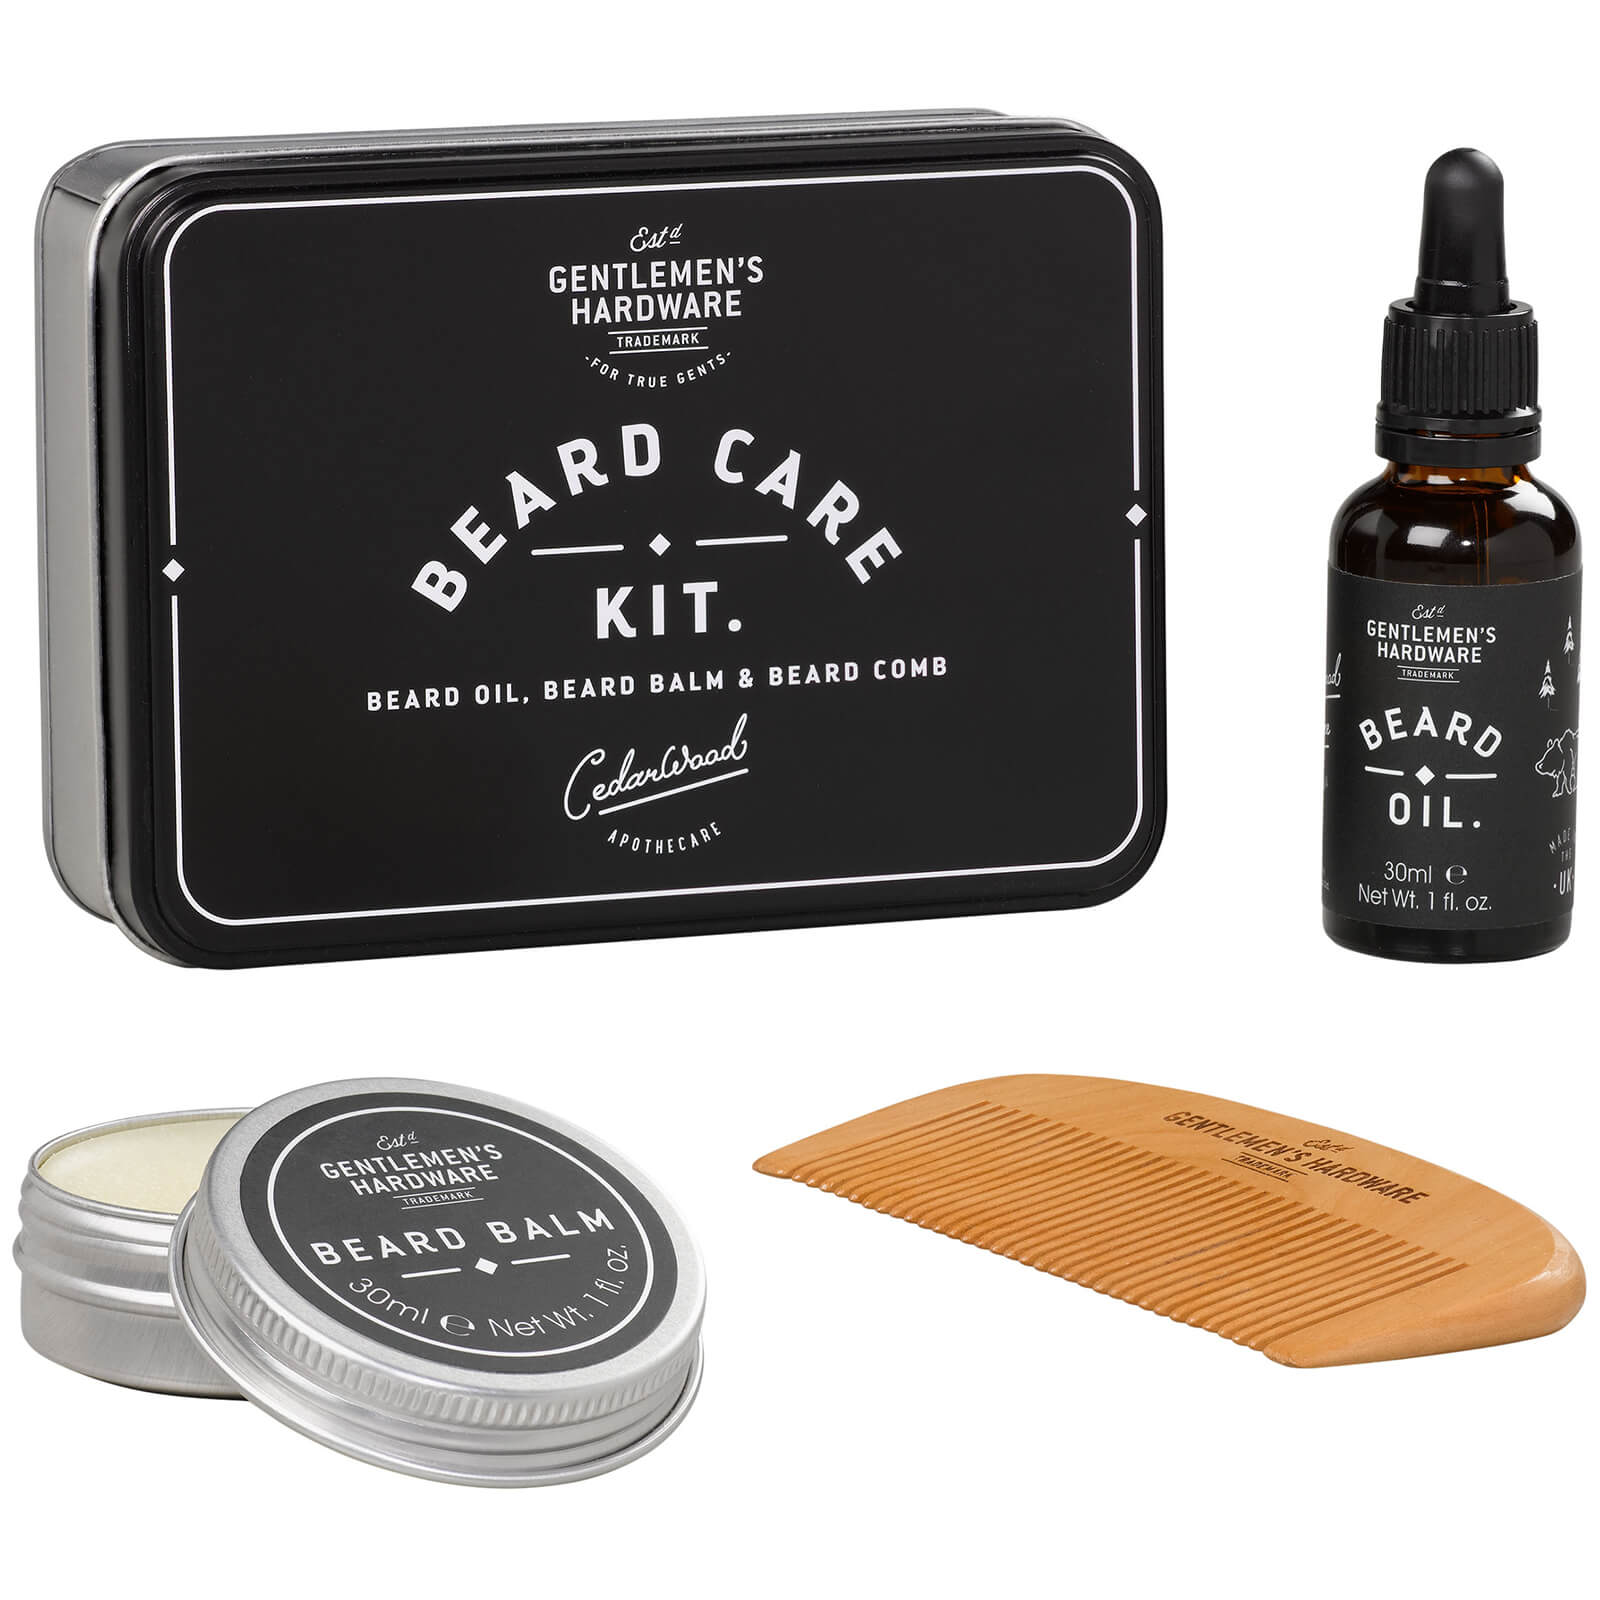 The Gentleman's Hardware Beard Care Kit features some of the finest beard products on the market in one handy pack.